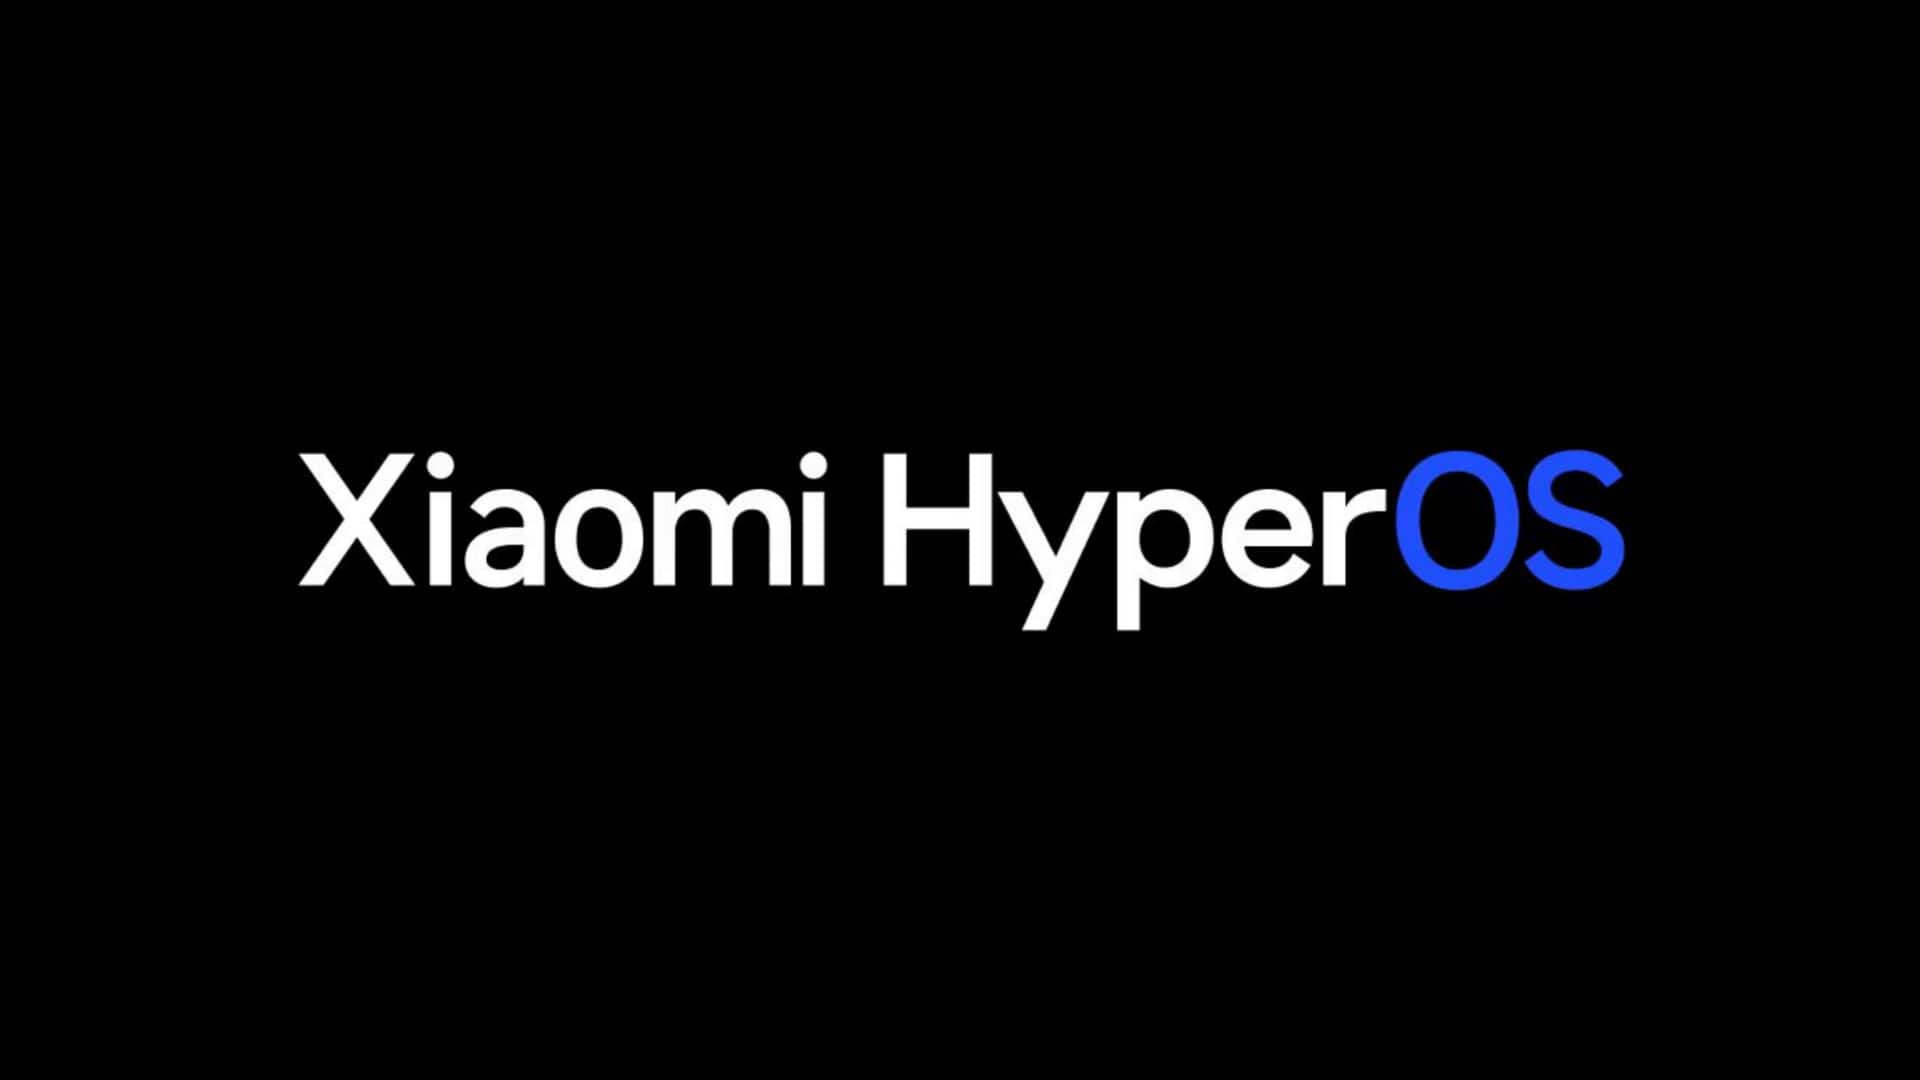 Xiaomi's new HyperOS to replace MIUI after 13 years